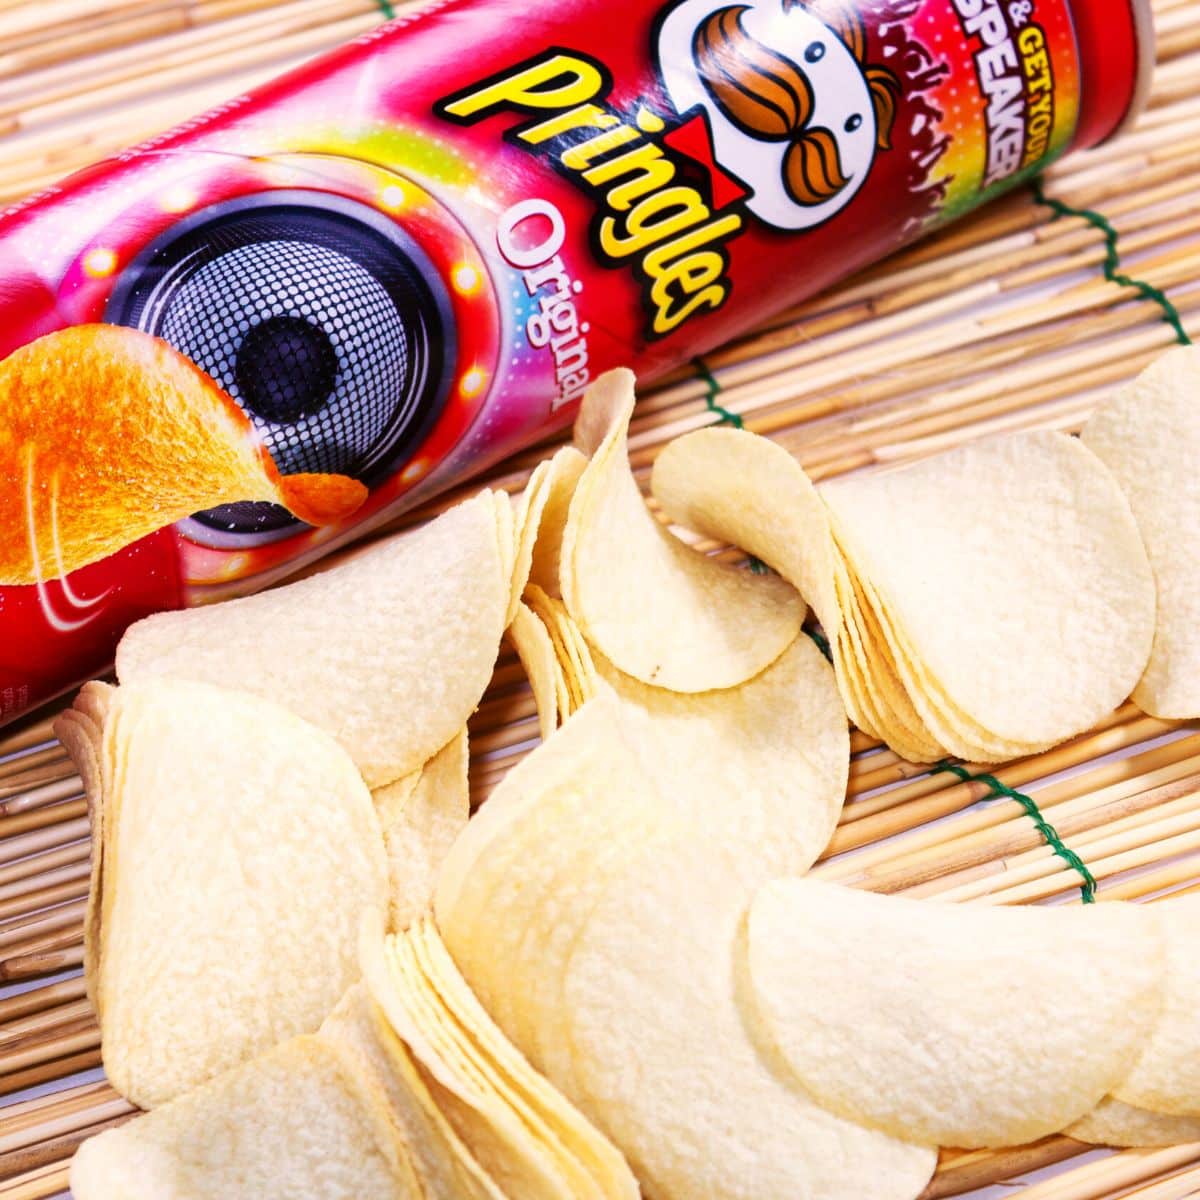 Pringles potato chips on a placemat next to the can.